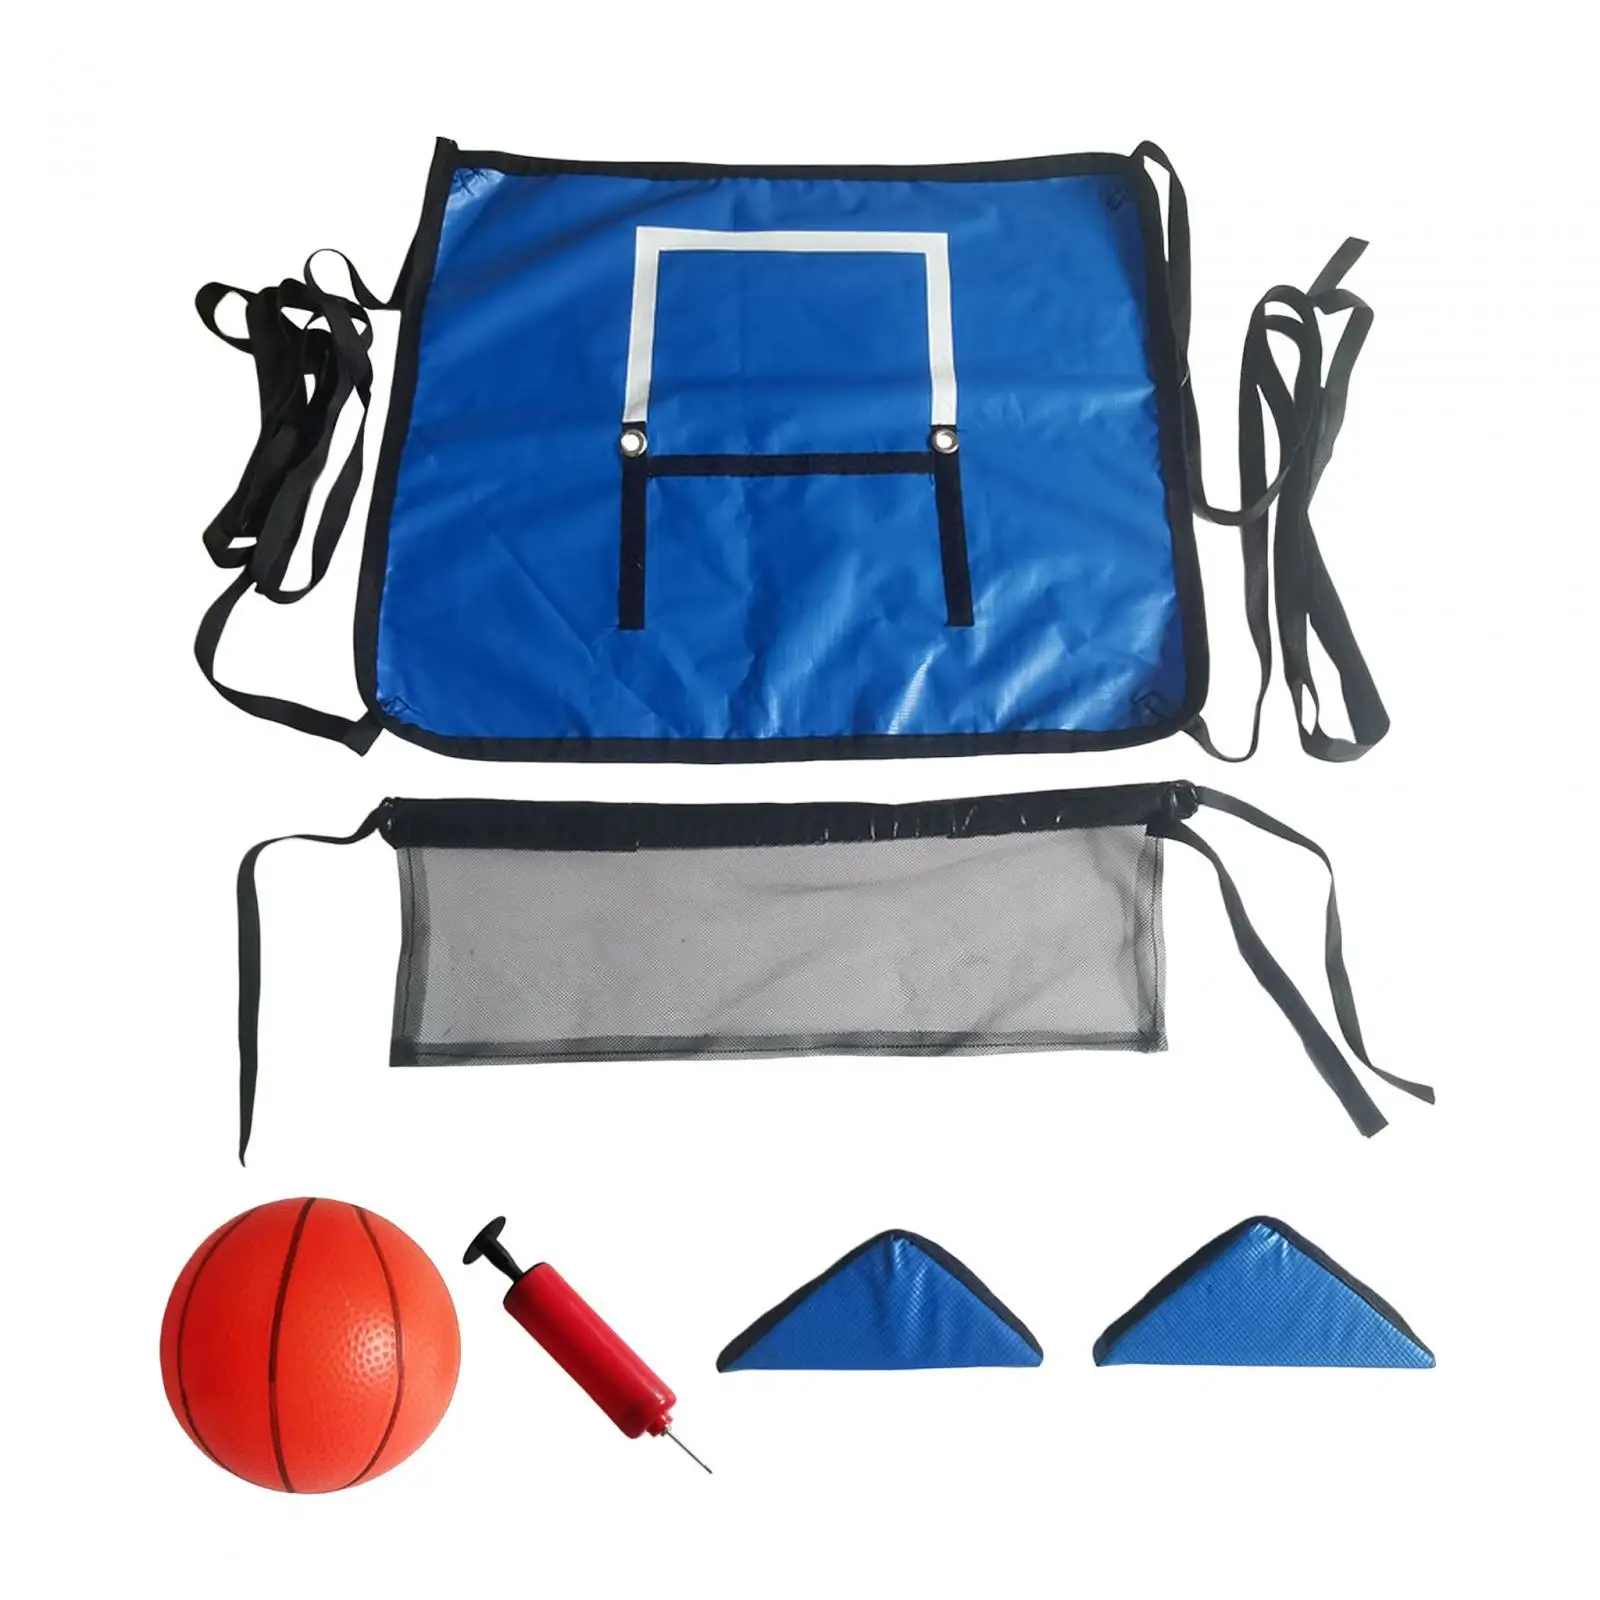 Trampoline Basketball Hoop for Outdoor including Small Basketball Easy to Install Durable for Kids Adults Garden Basketball Goal